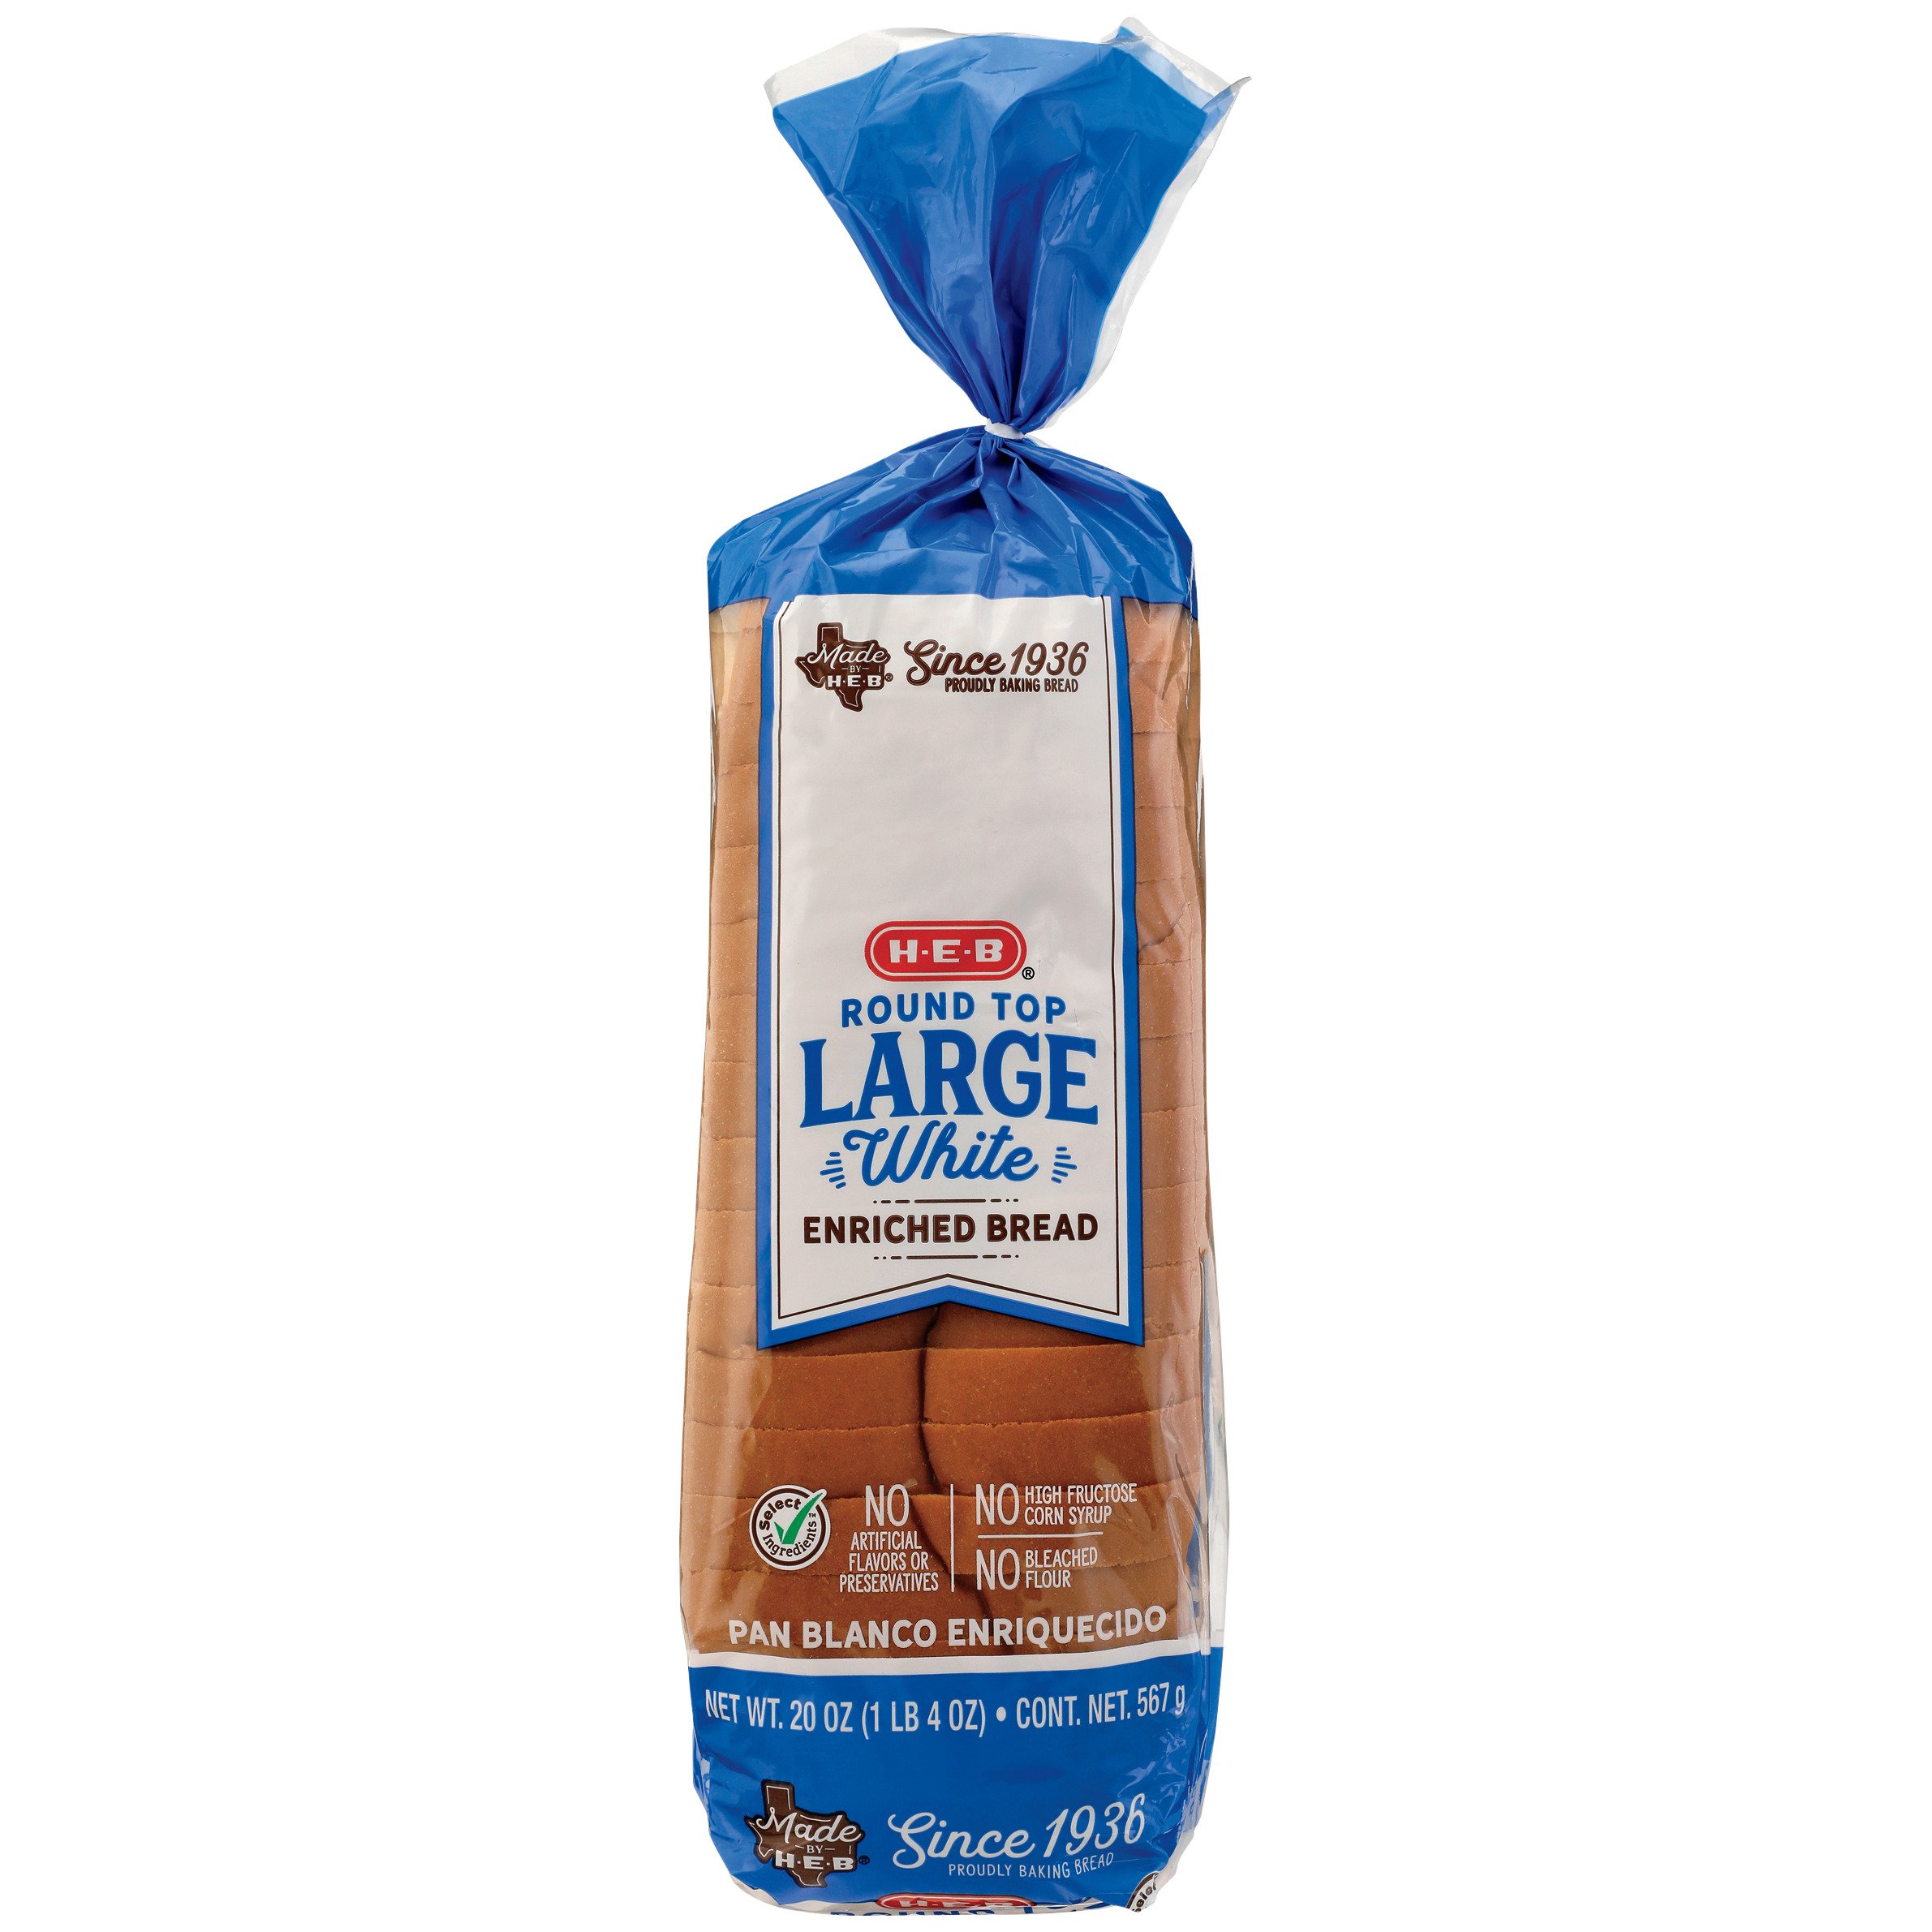 H-E-B Round Top Large White Enriched Bread - Shop Sliced Bread at H-E-B